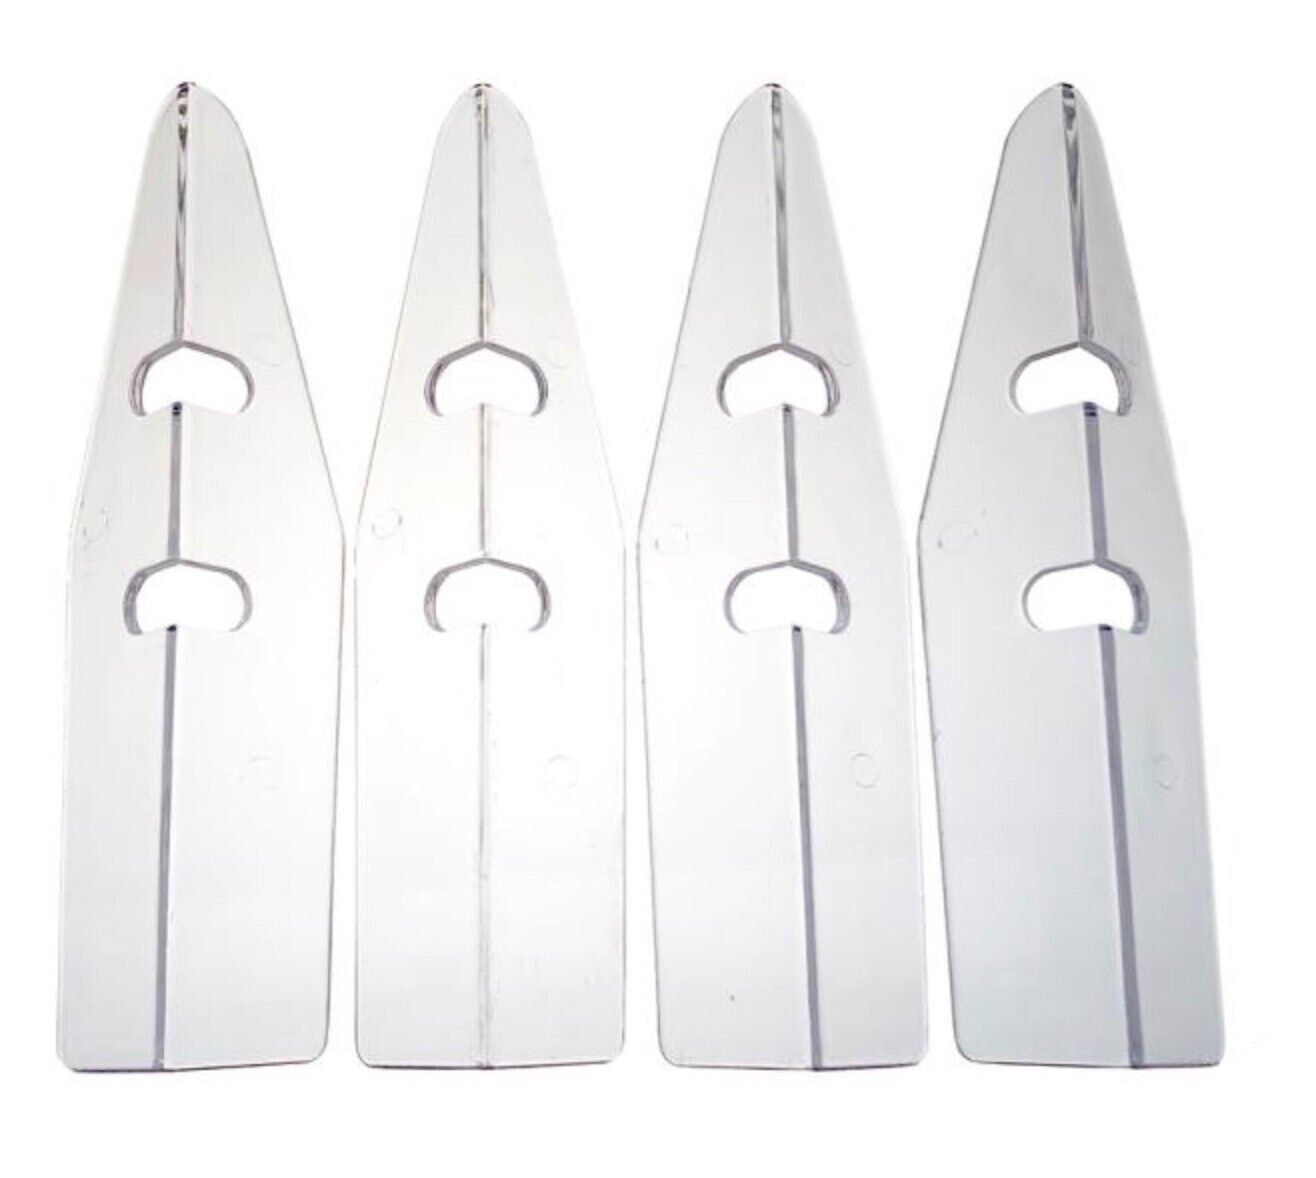 Pinball Machine Cabinet Leg Protectors Set of 4 Clear - Now 50% off